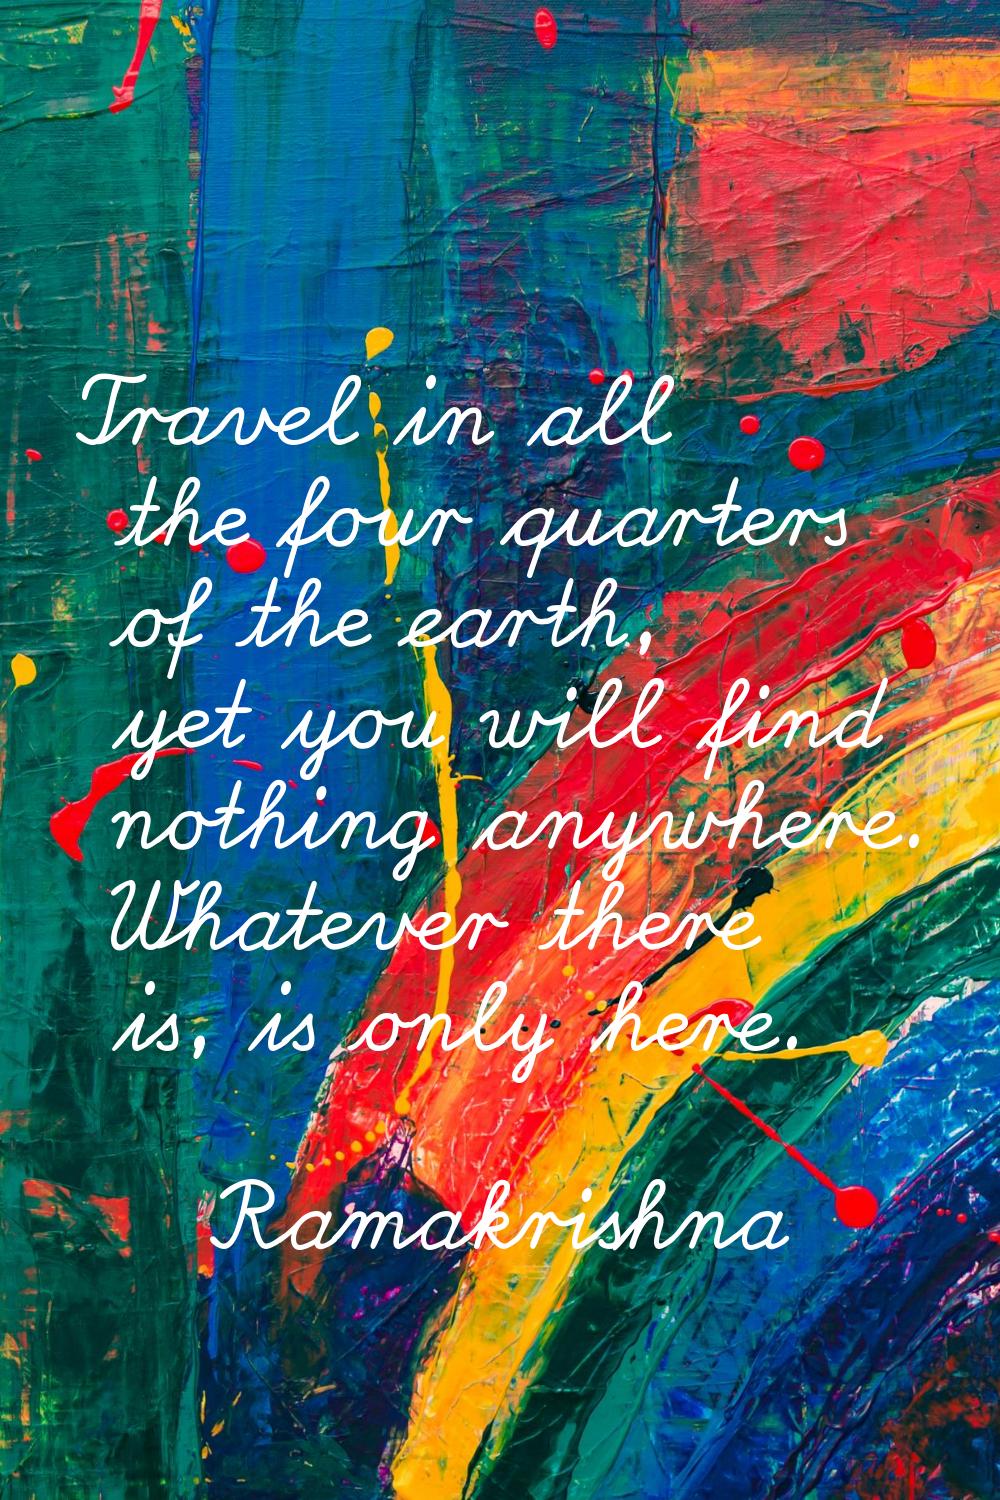 Travel in all the four quarters of the earth, yet you will find nothing anywhere. Whatever there is